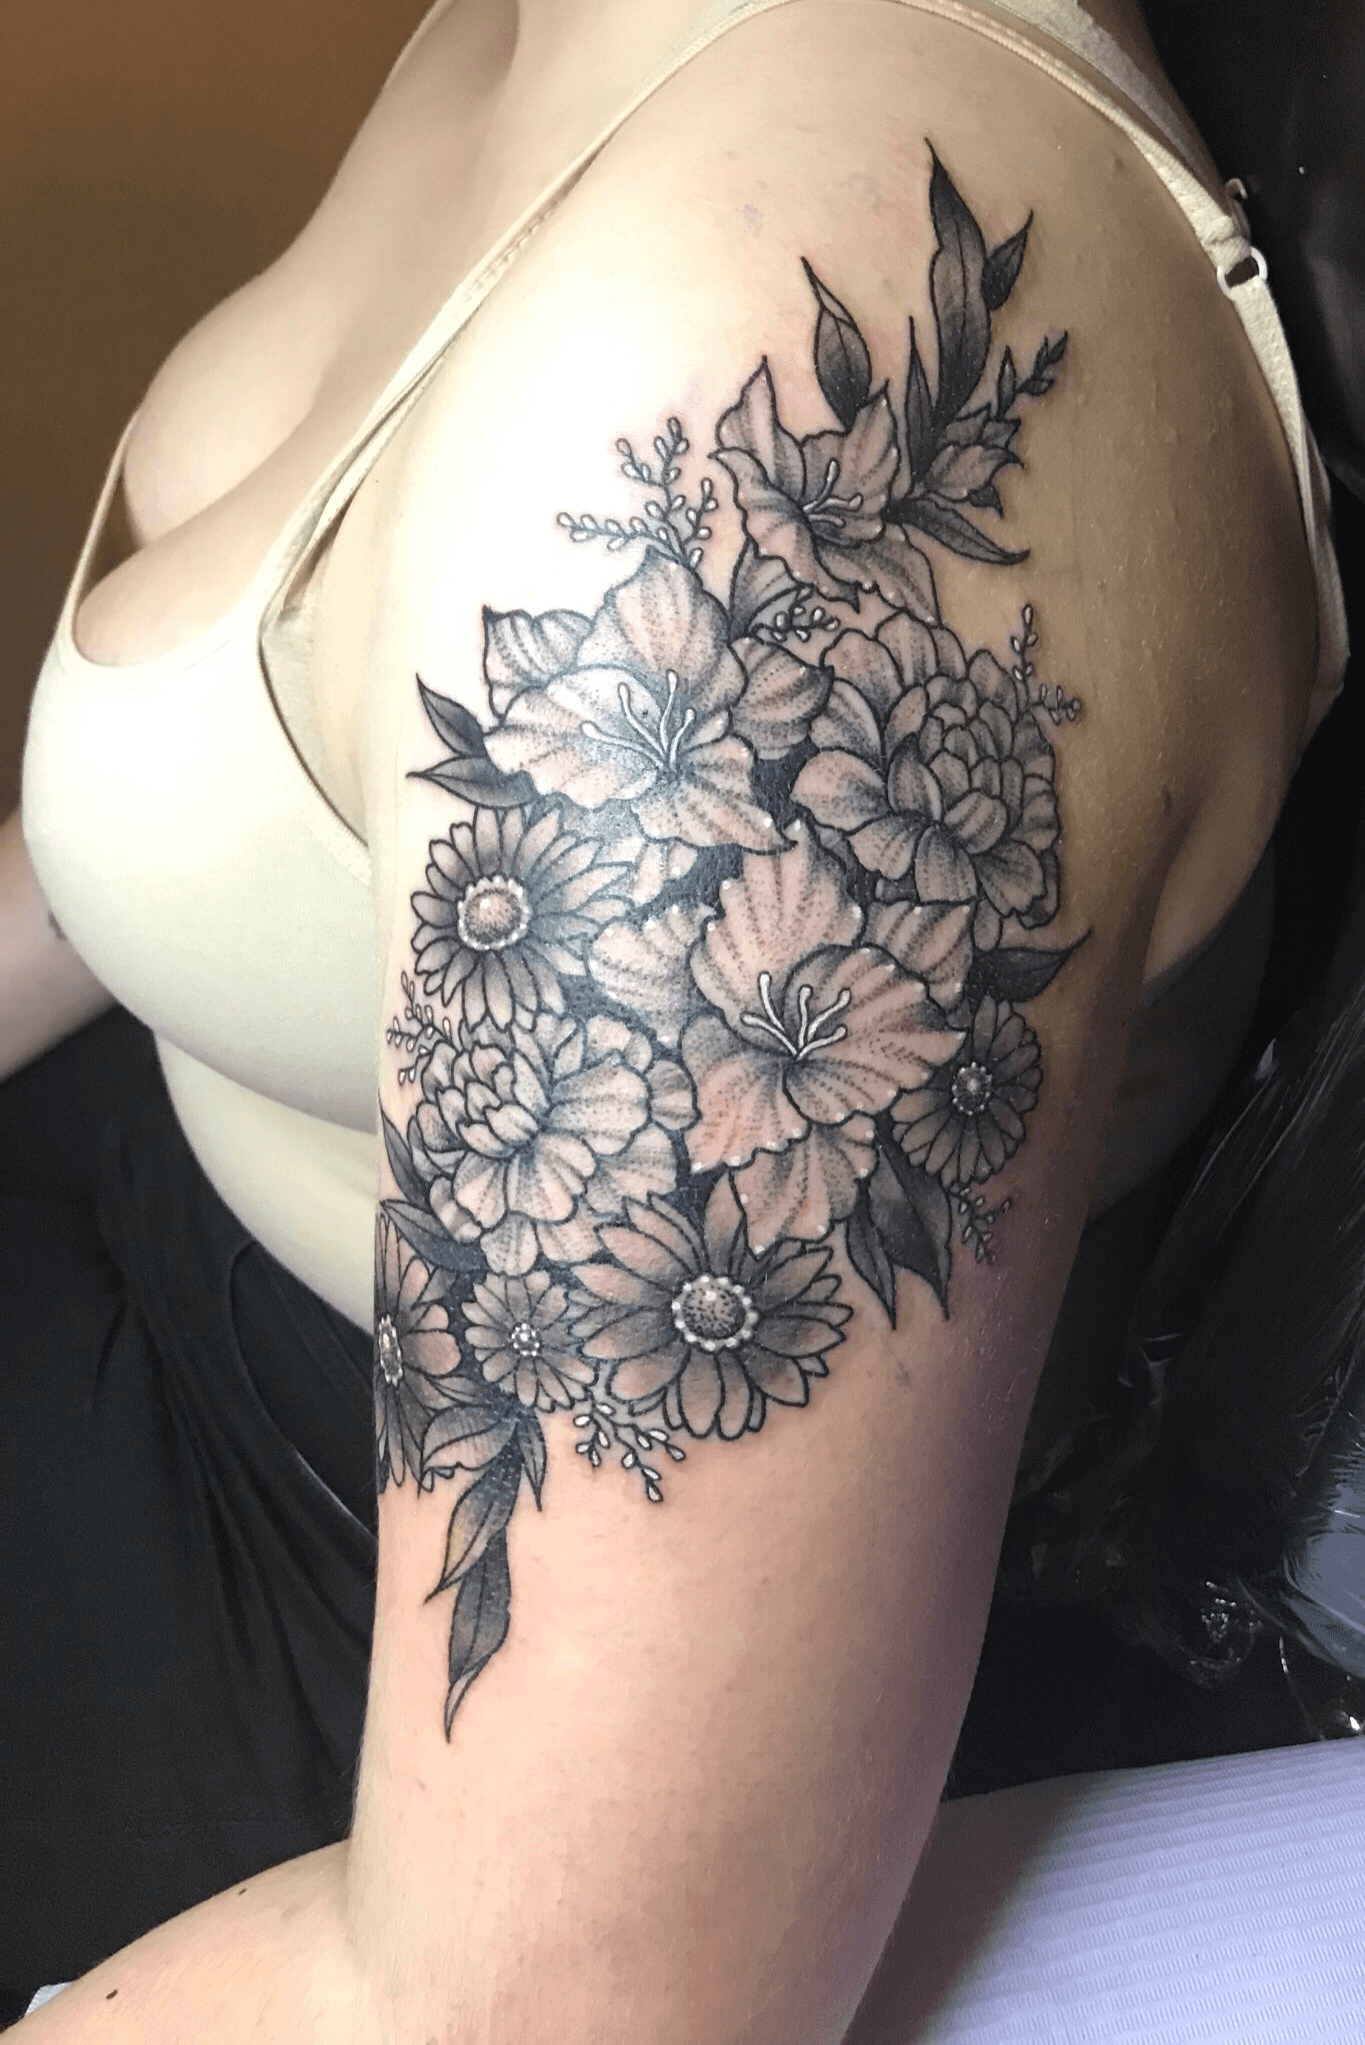 Can anyone identify the flowers in this tattoo  rflowers